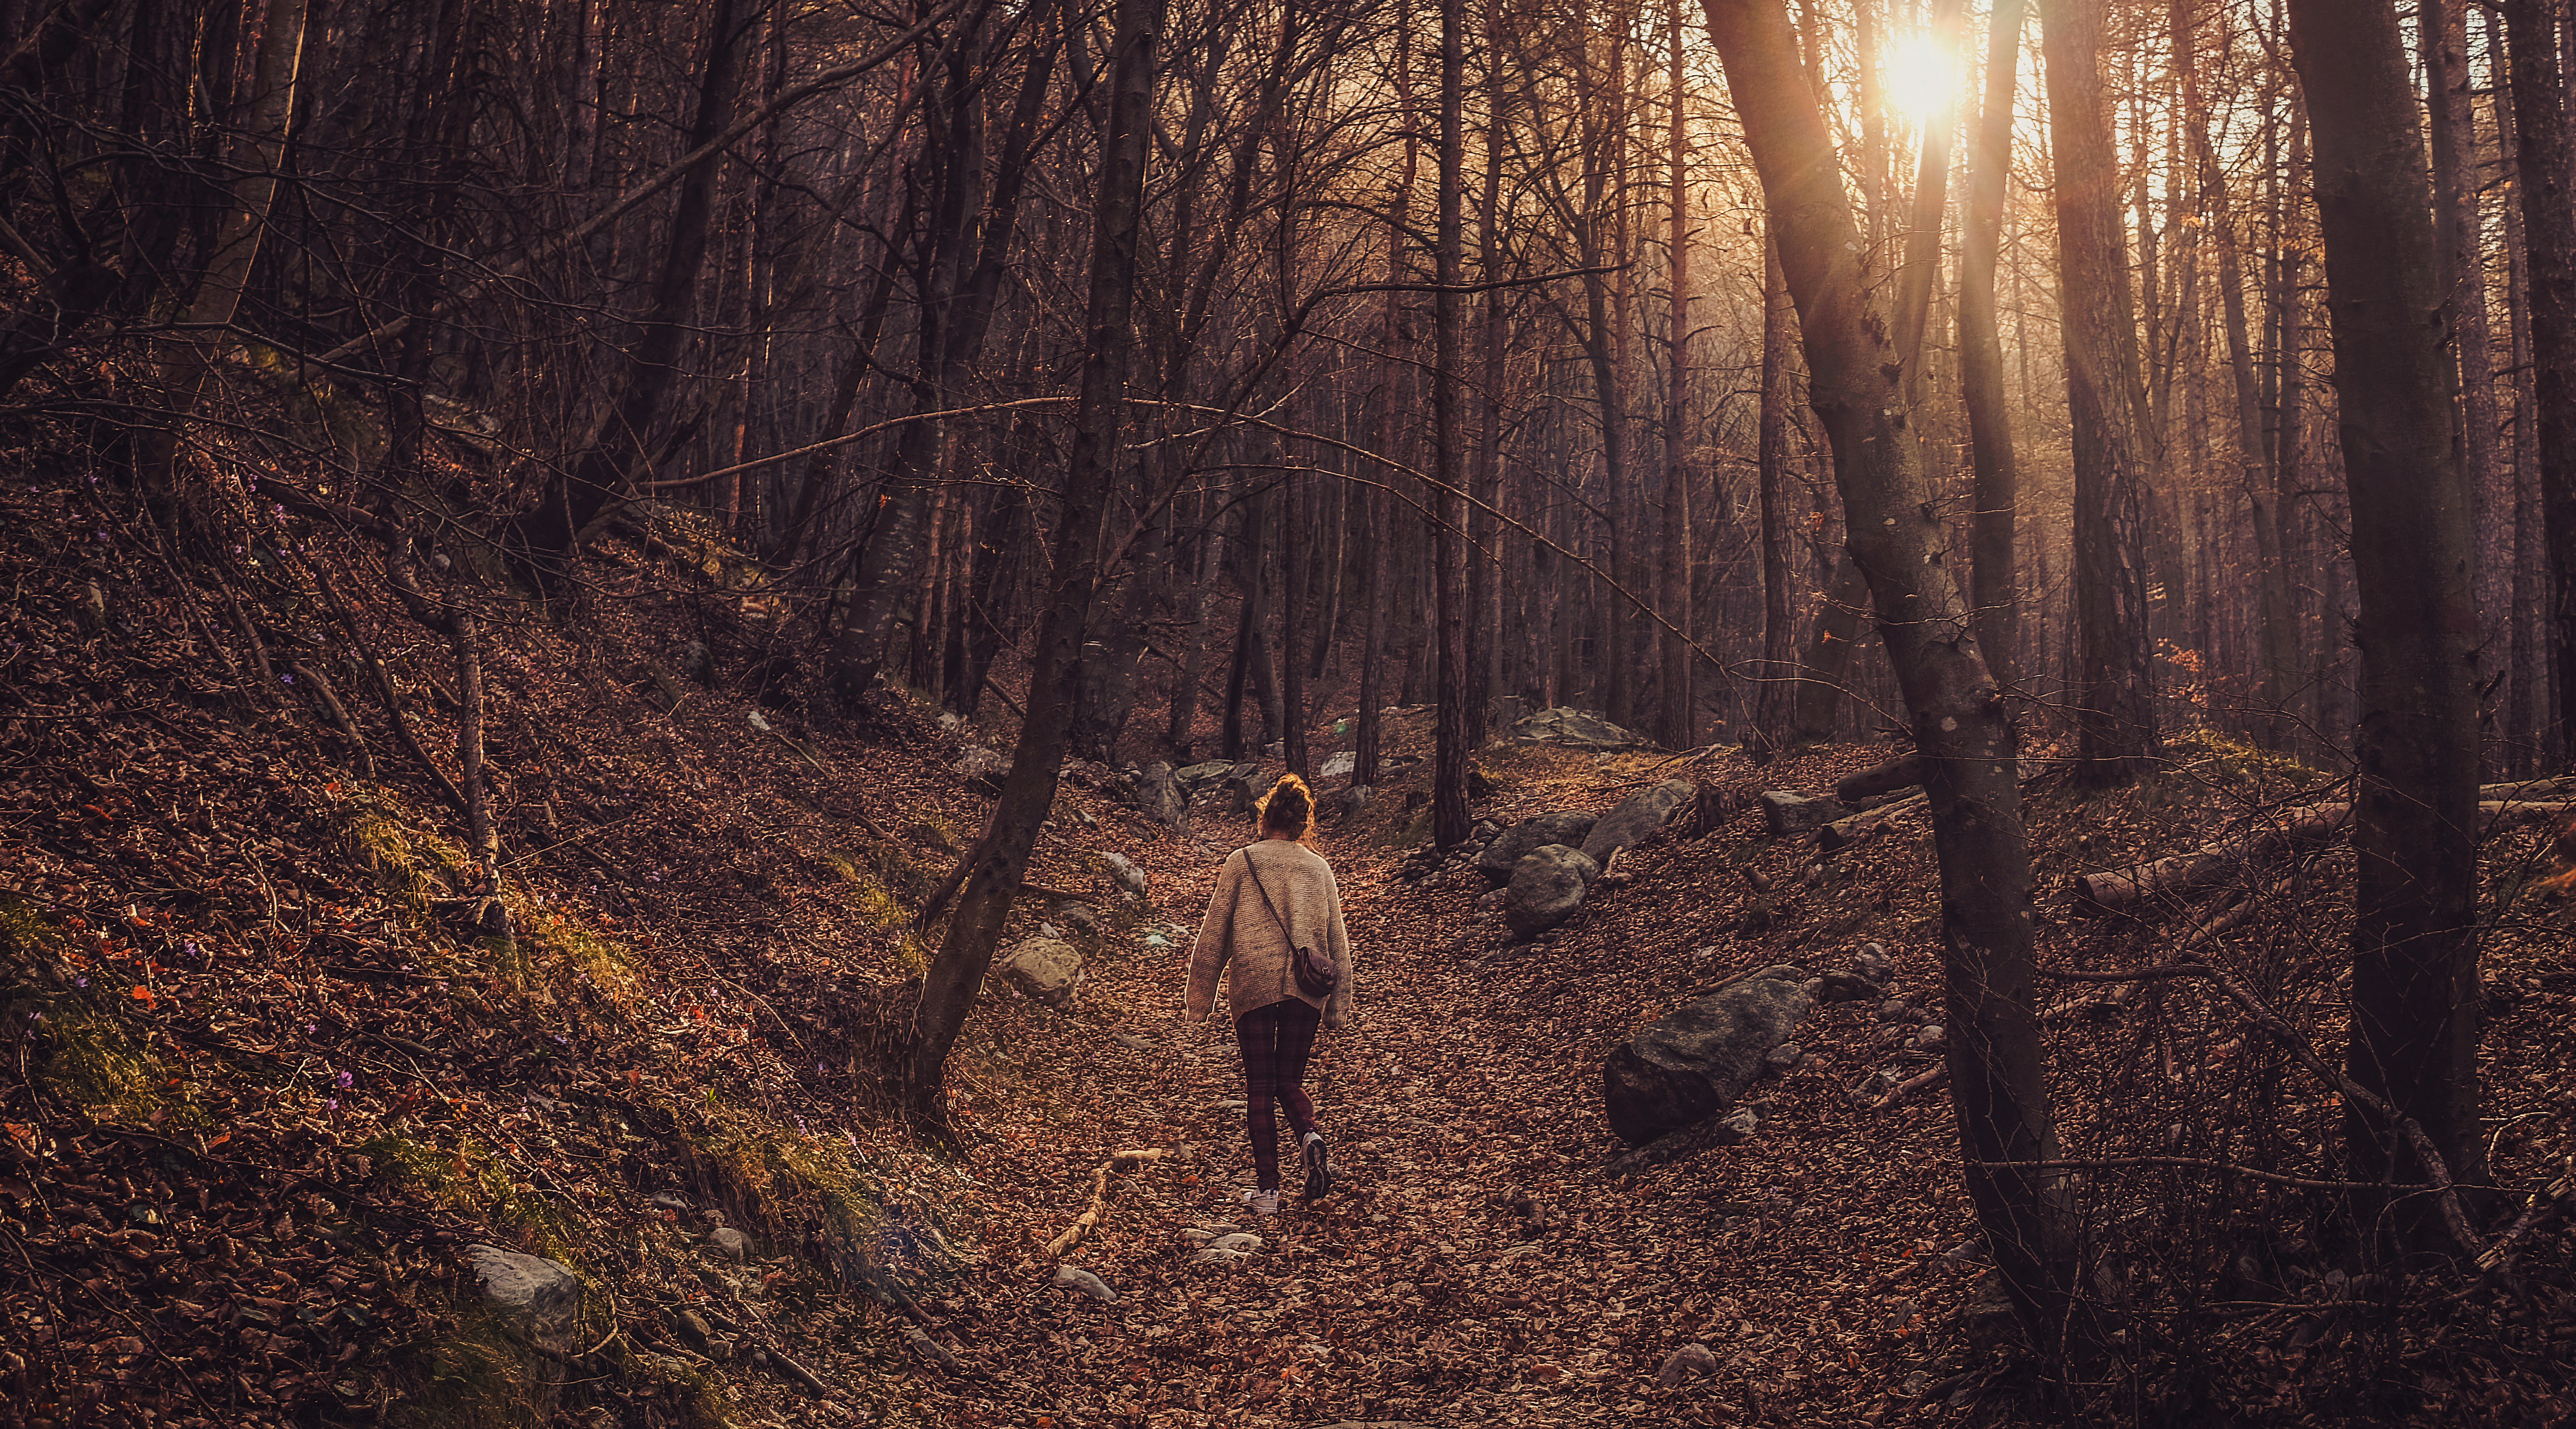 A woman walking through a forest in the afternoon